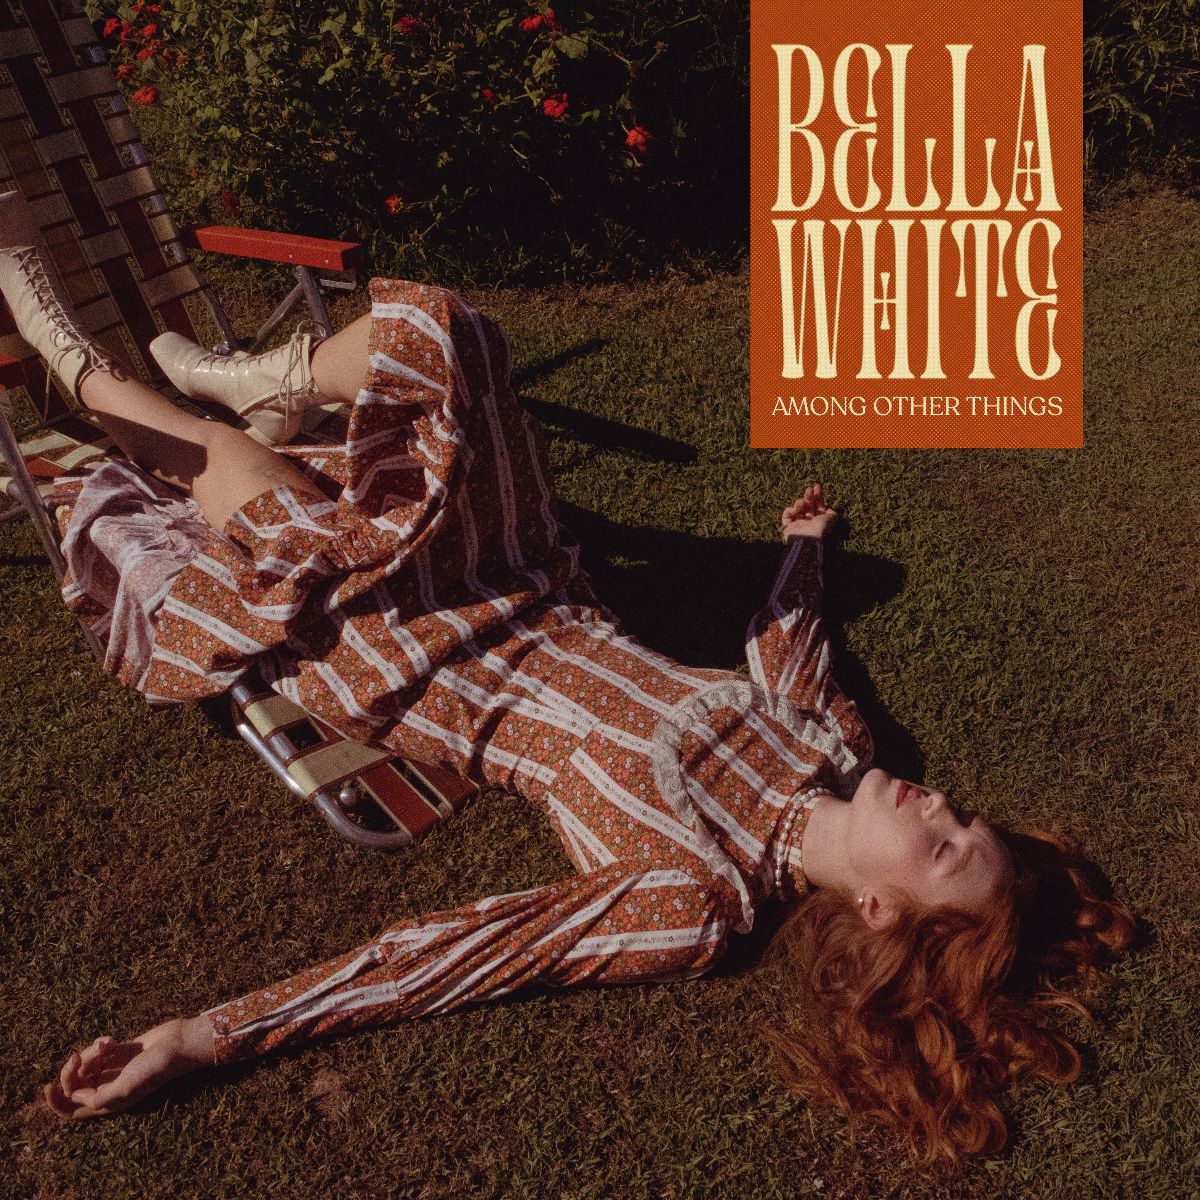 Bella White announces new album ‘Among Other Things’ out April 21st